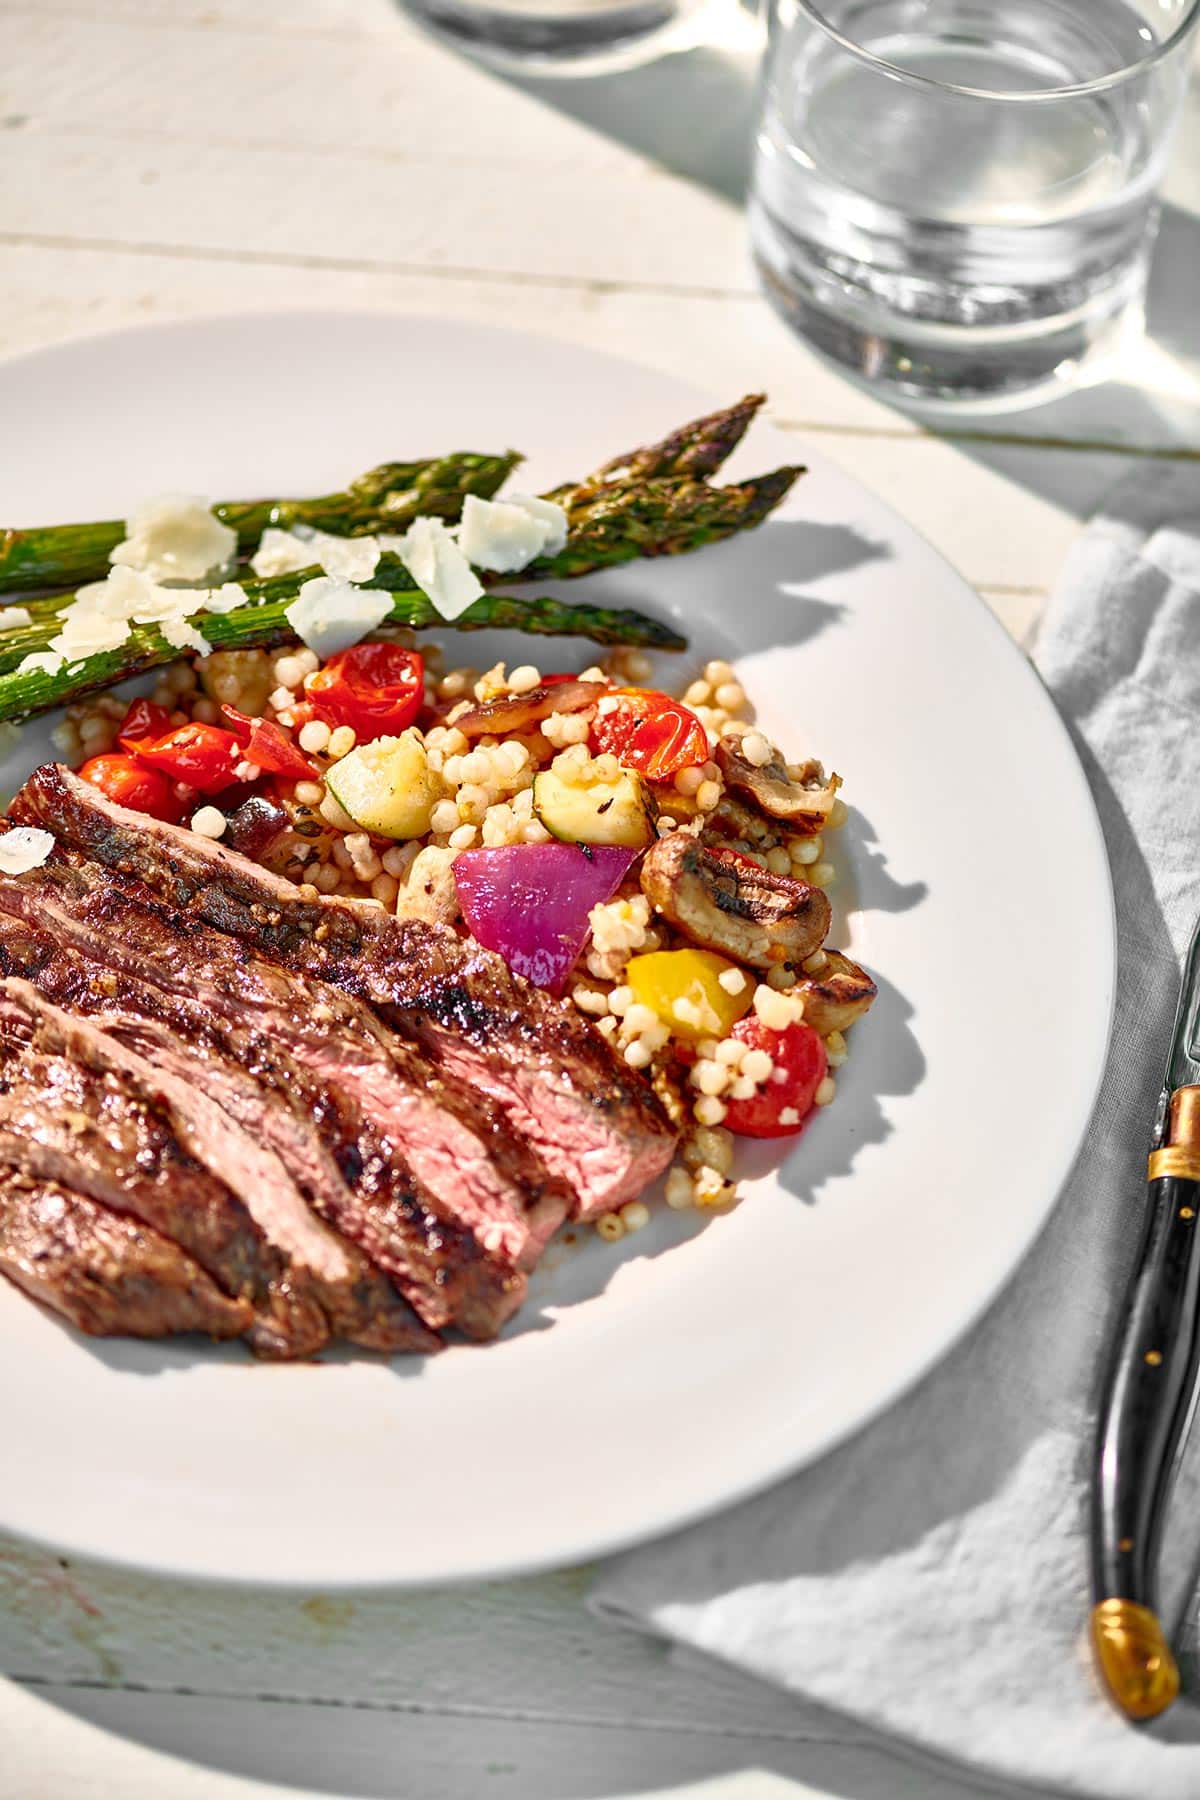 Sliced Balsamic Marinated Skirt Steak on a plate with grilled asparagus and couscous  grilled vegetable salad.